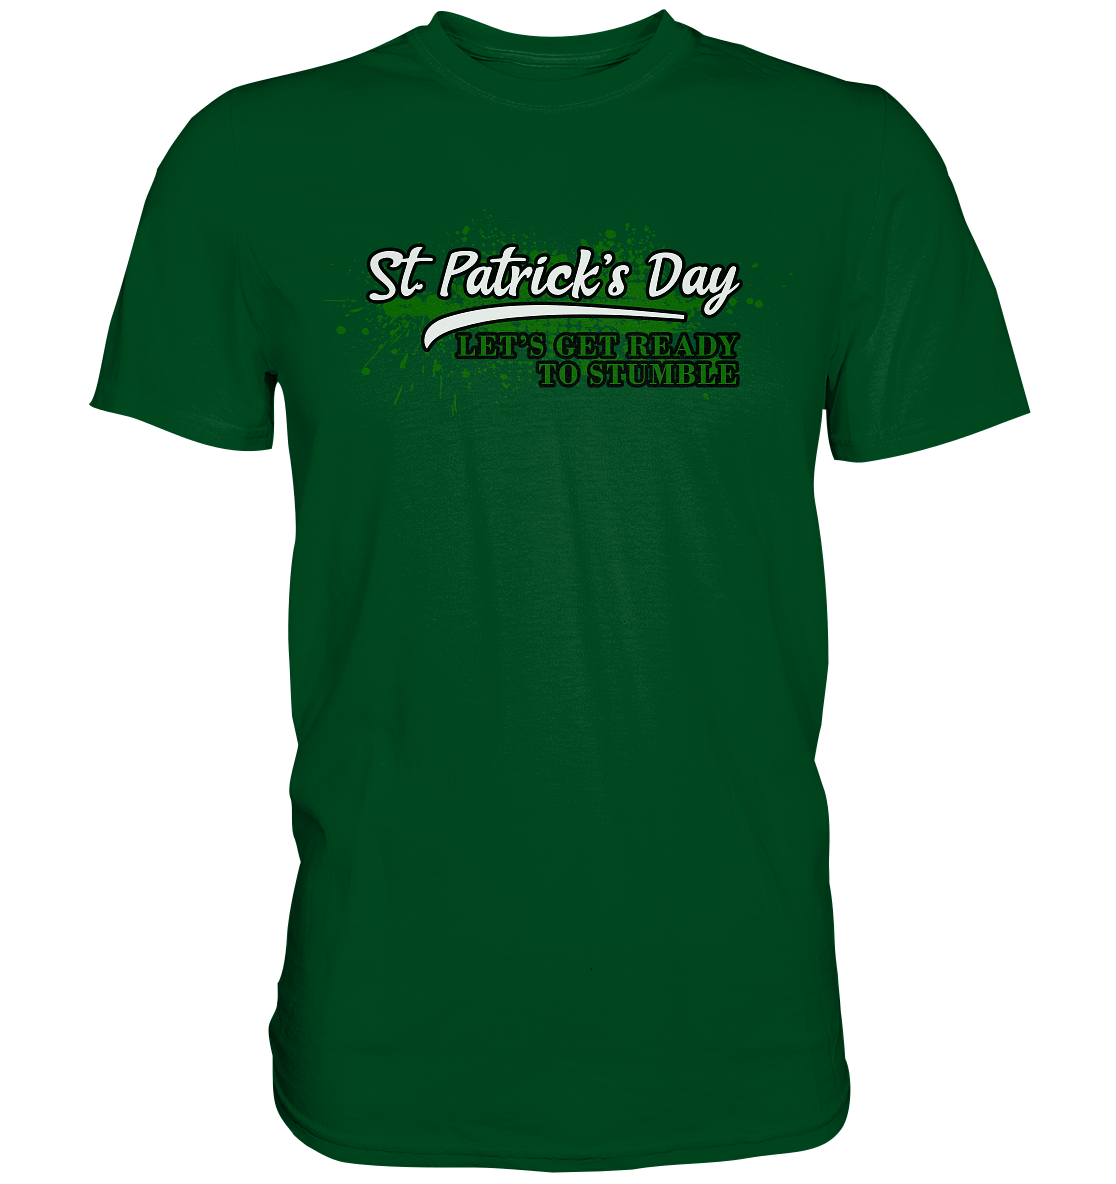 St. Patrick's Day "Let's Get Ready To Stumble" - Premium Shirt